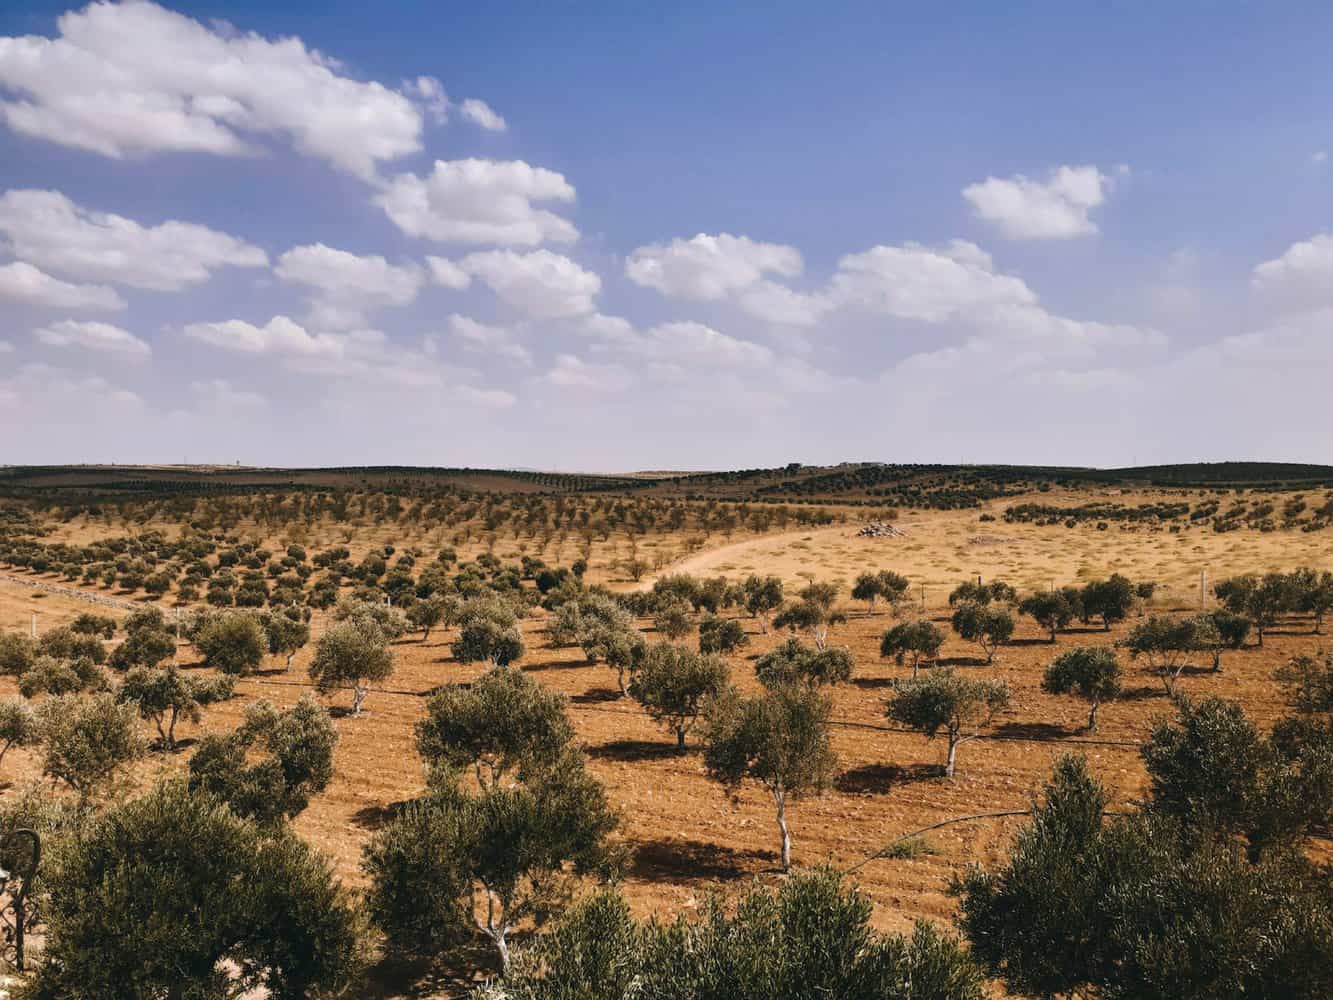 an olive tree plantation in an arid land